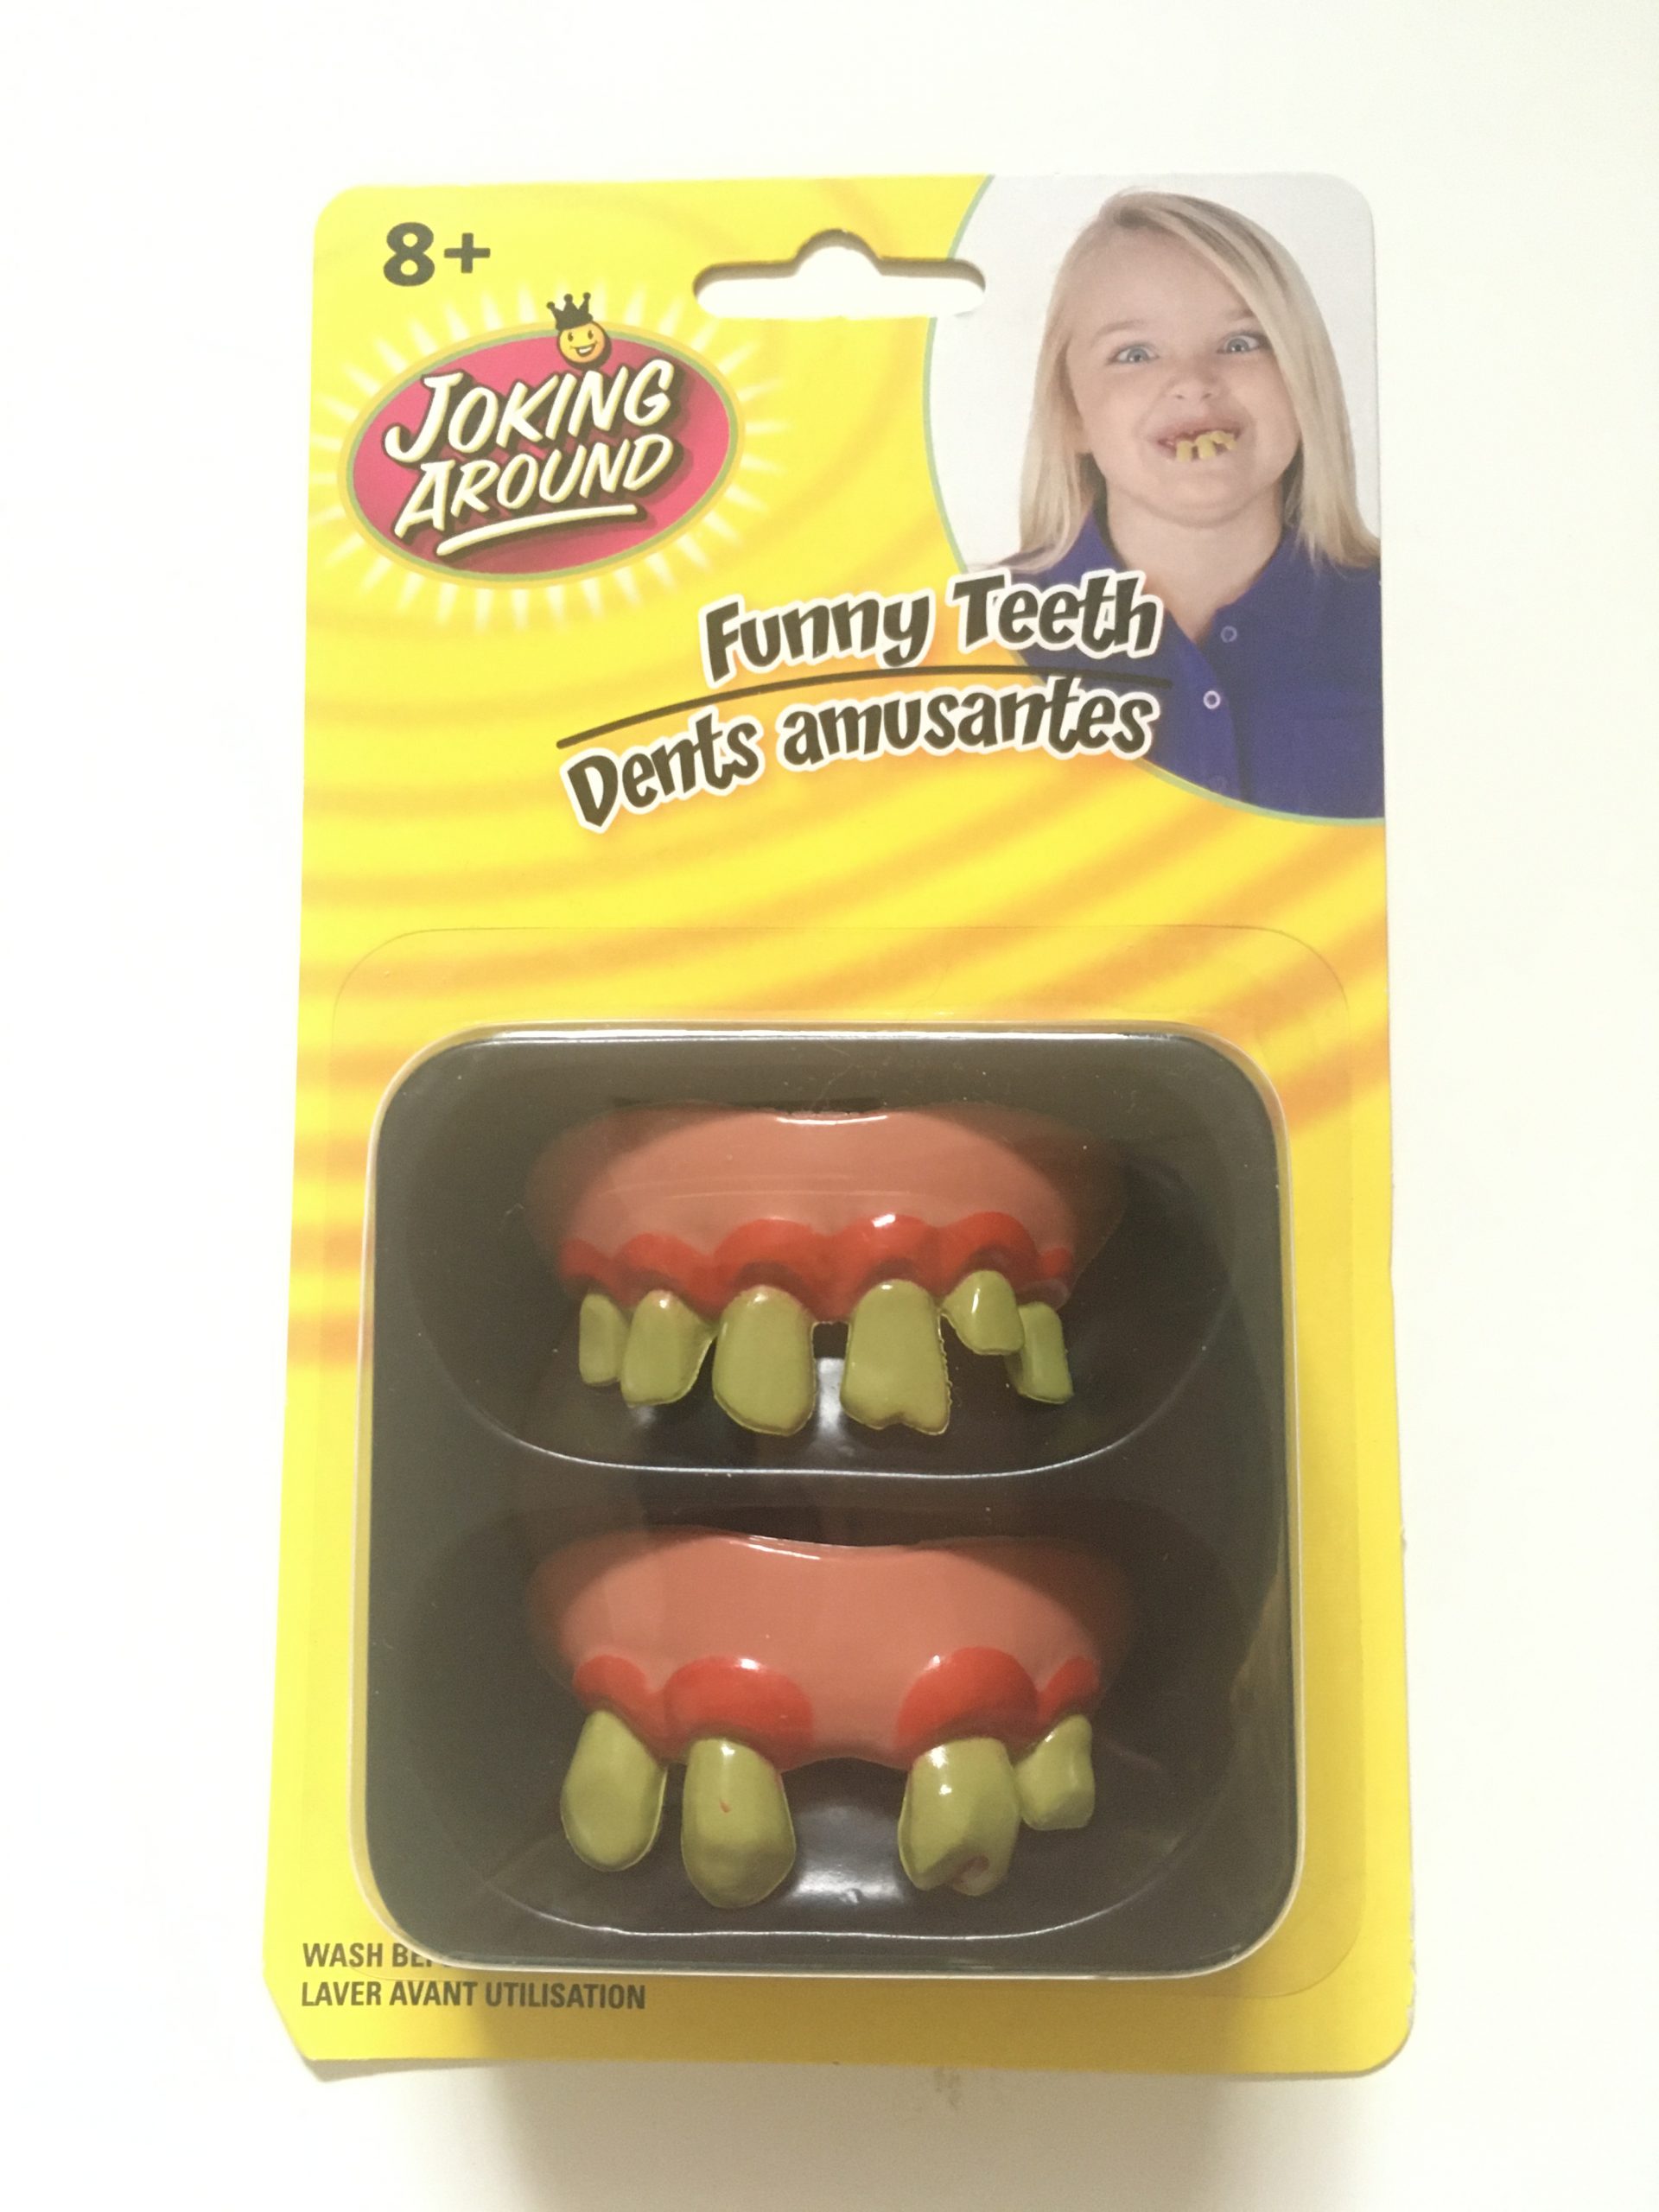 Crazy teeth toy purchased from Dollar Tree